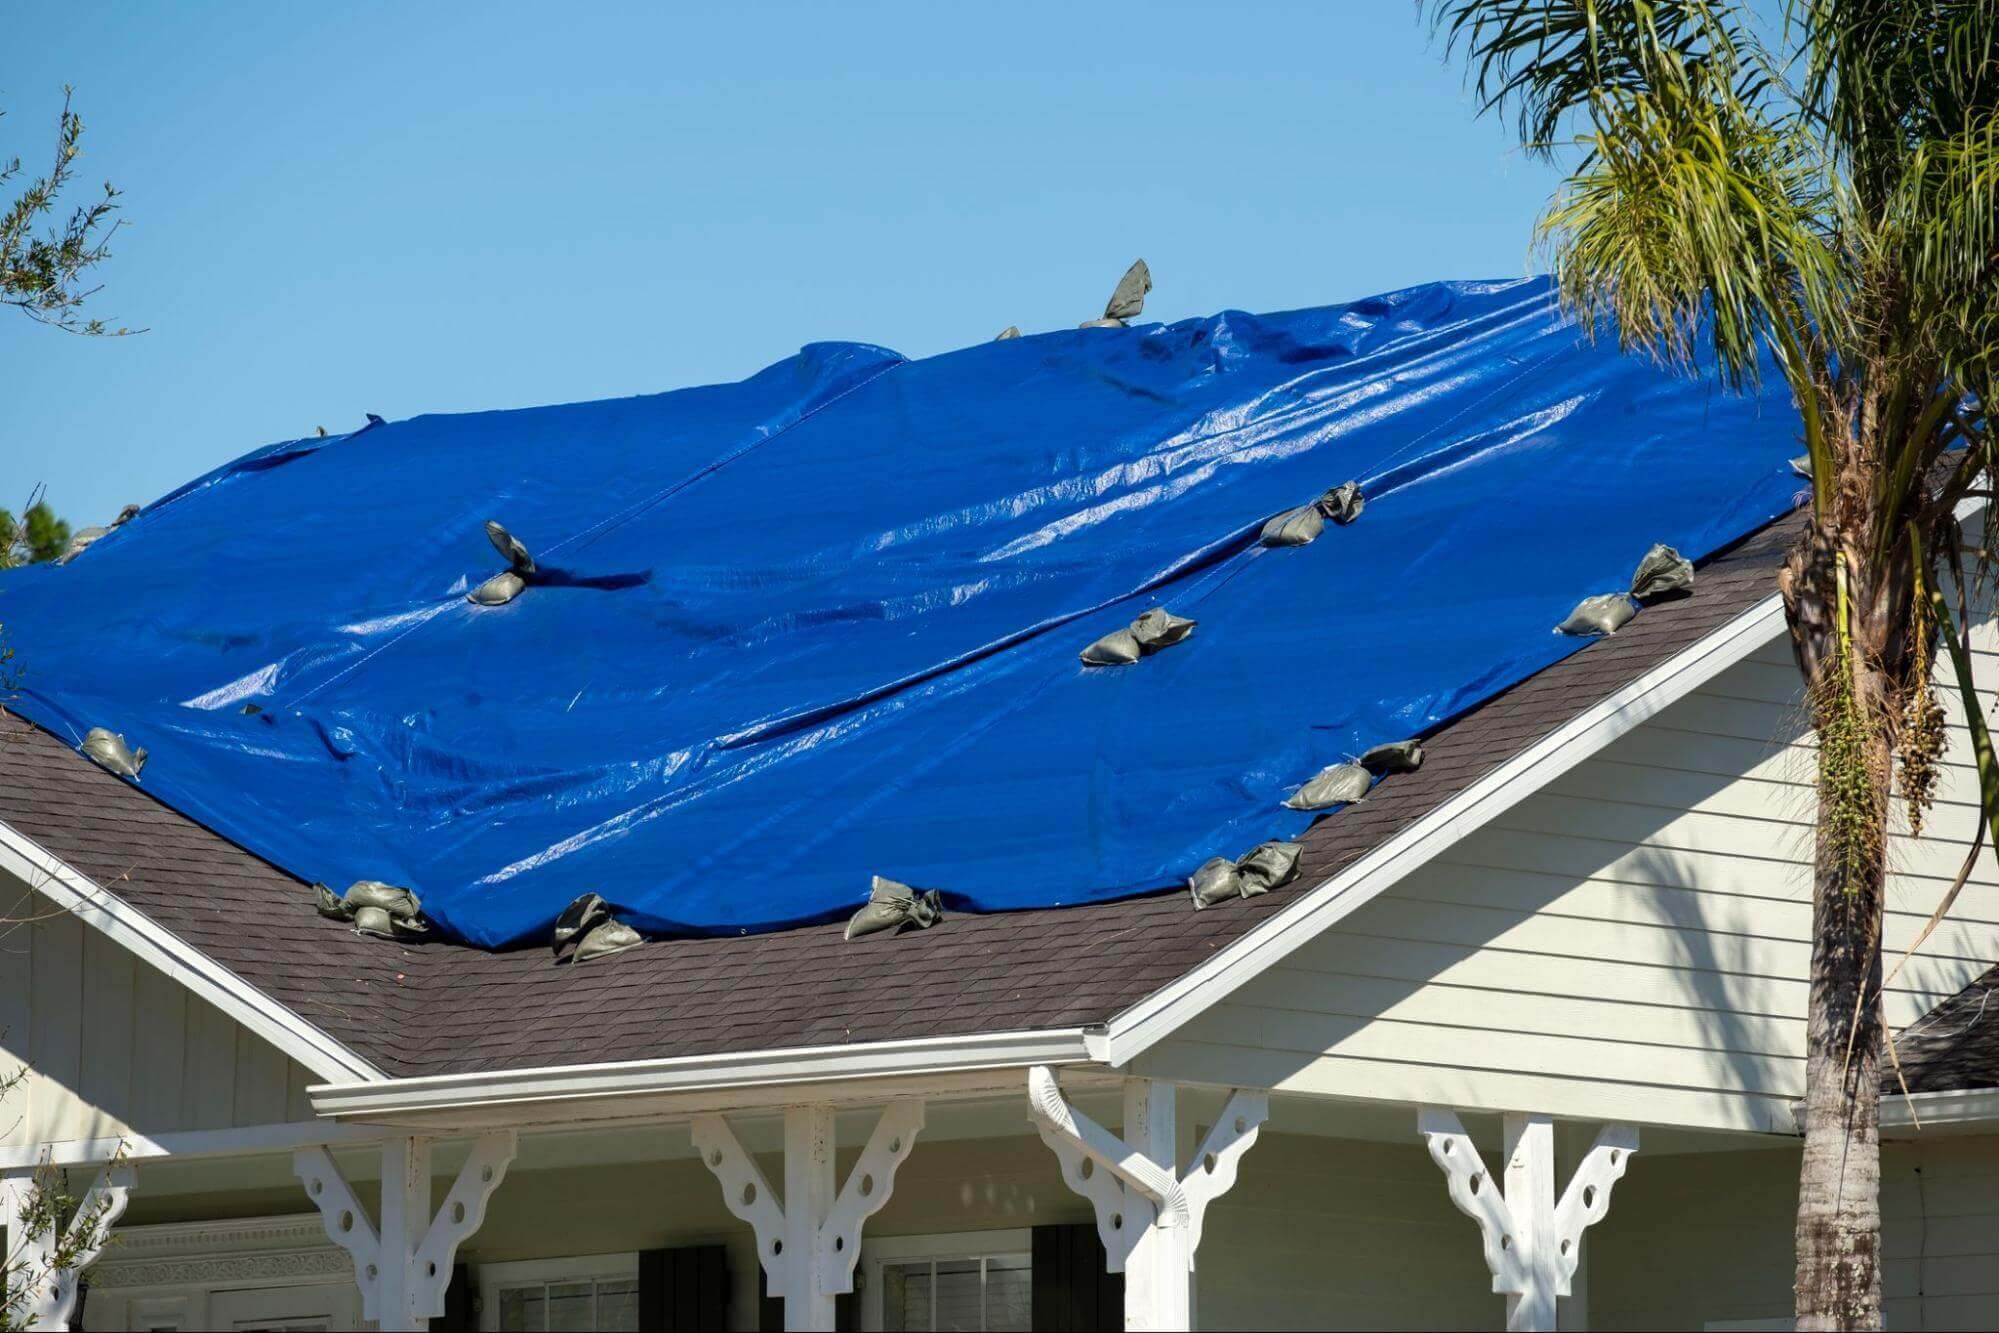 A leaking roof with a blue tarp.